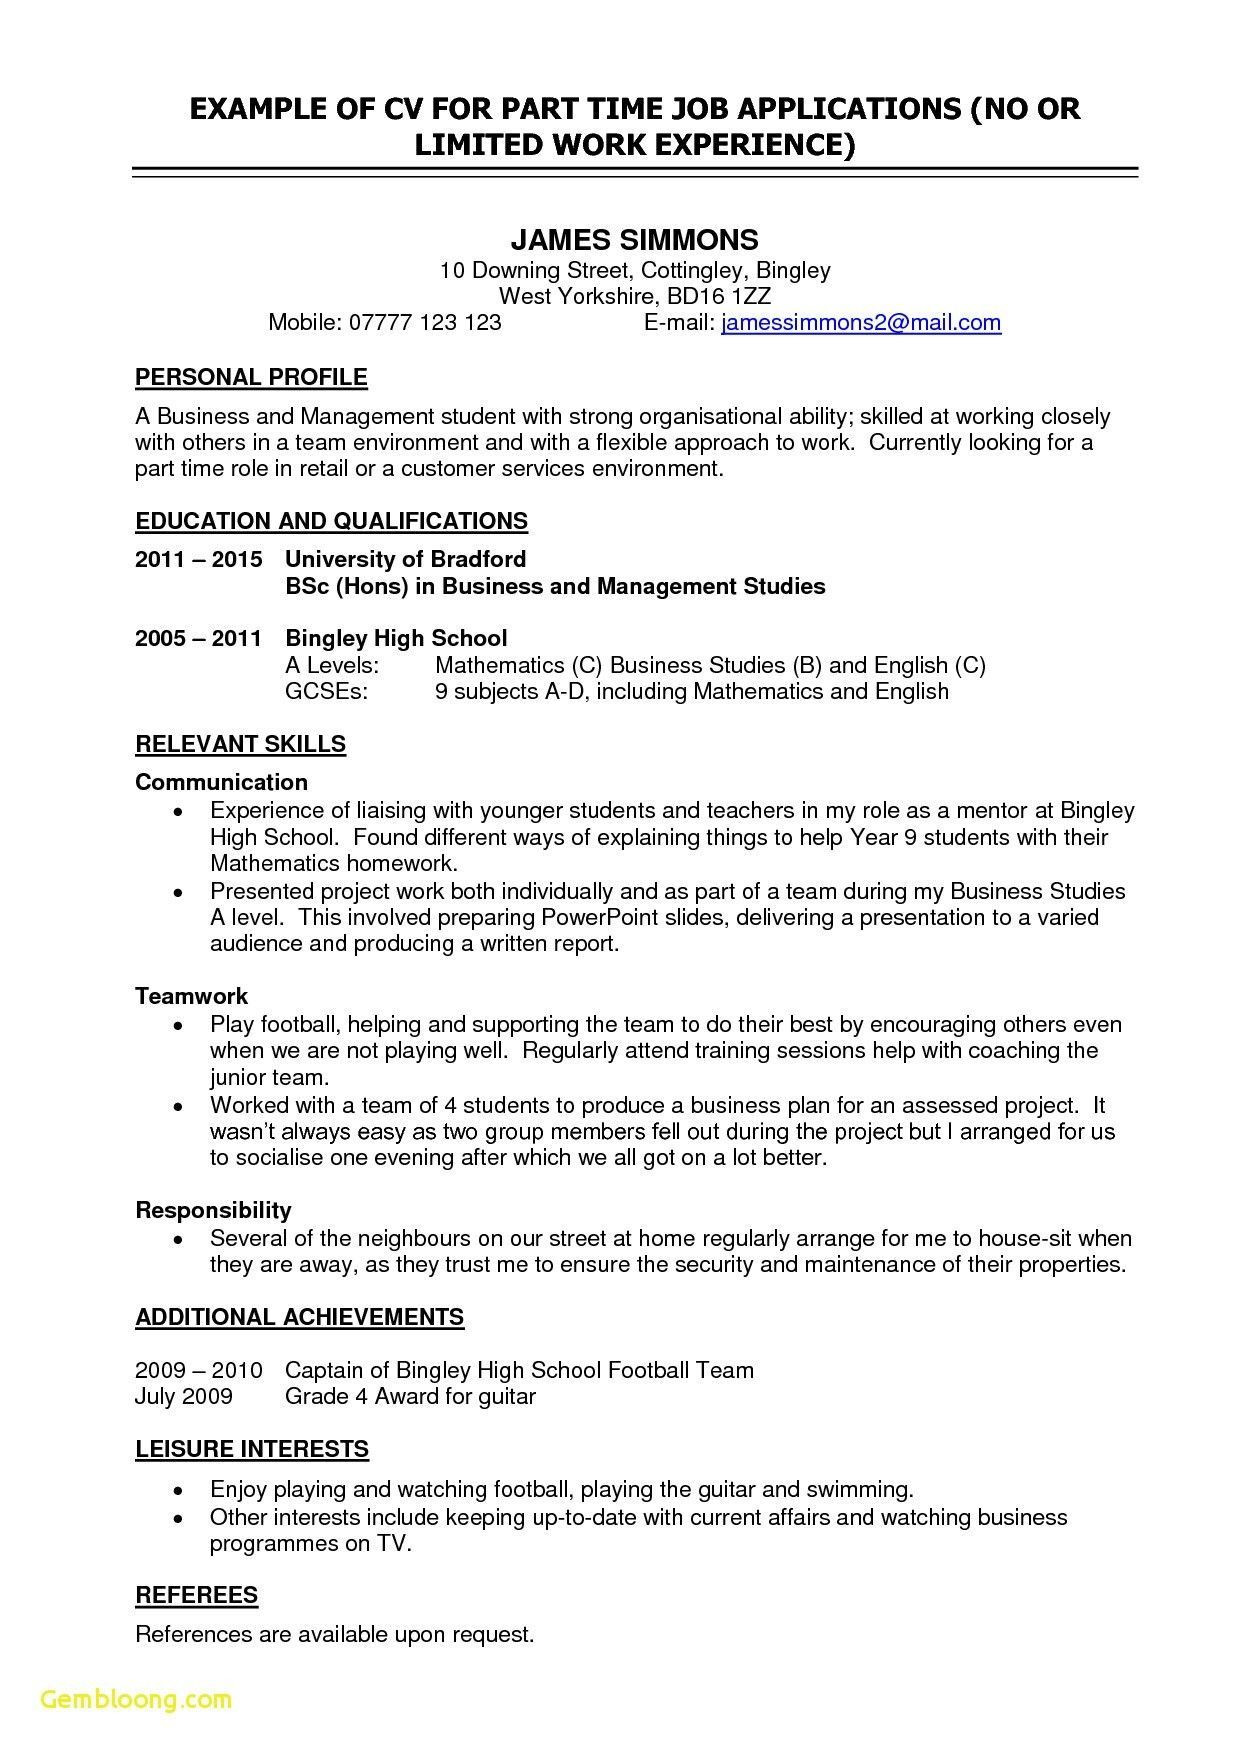 Sample Resume for Casual Jobs In Australia 75 Inspiring Photos Of Resume Examples for Students with No Work …